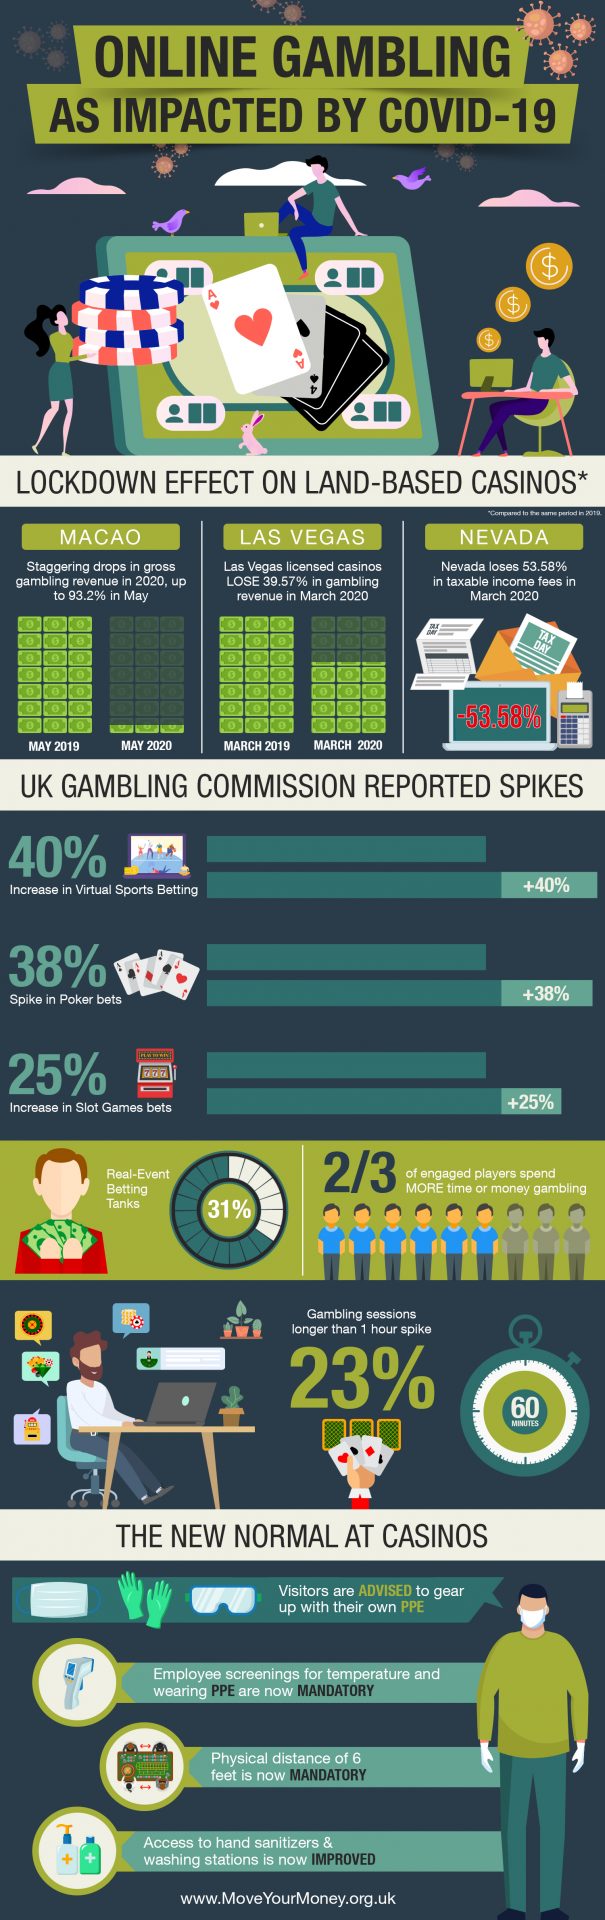 Online Gambling as Impacted by Covid-19 Infographic